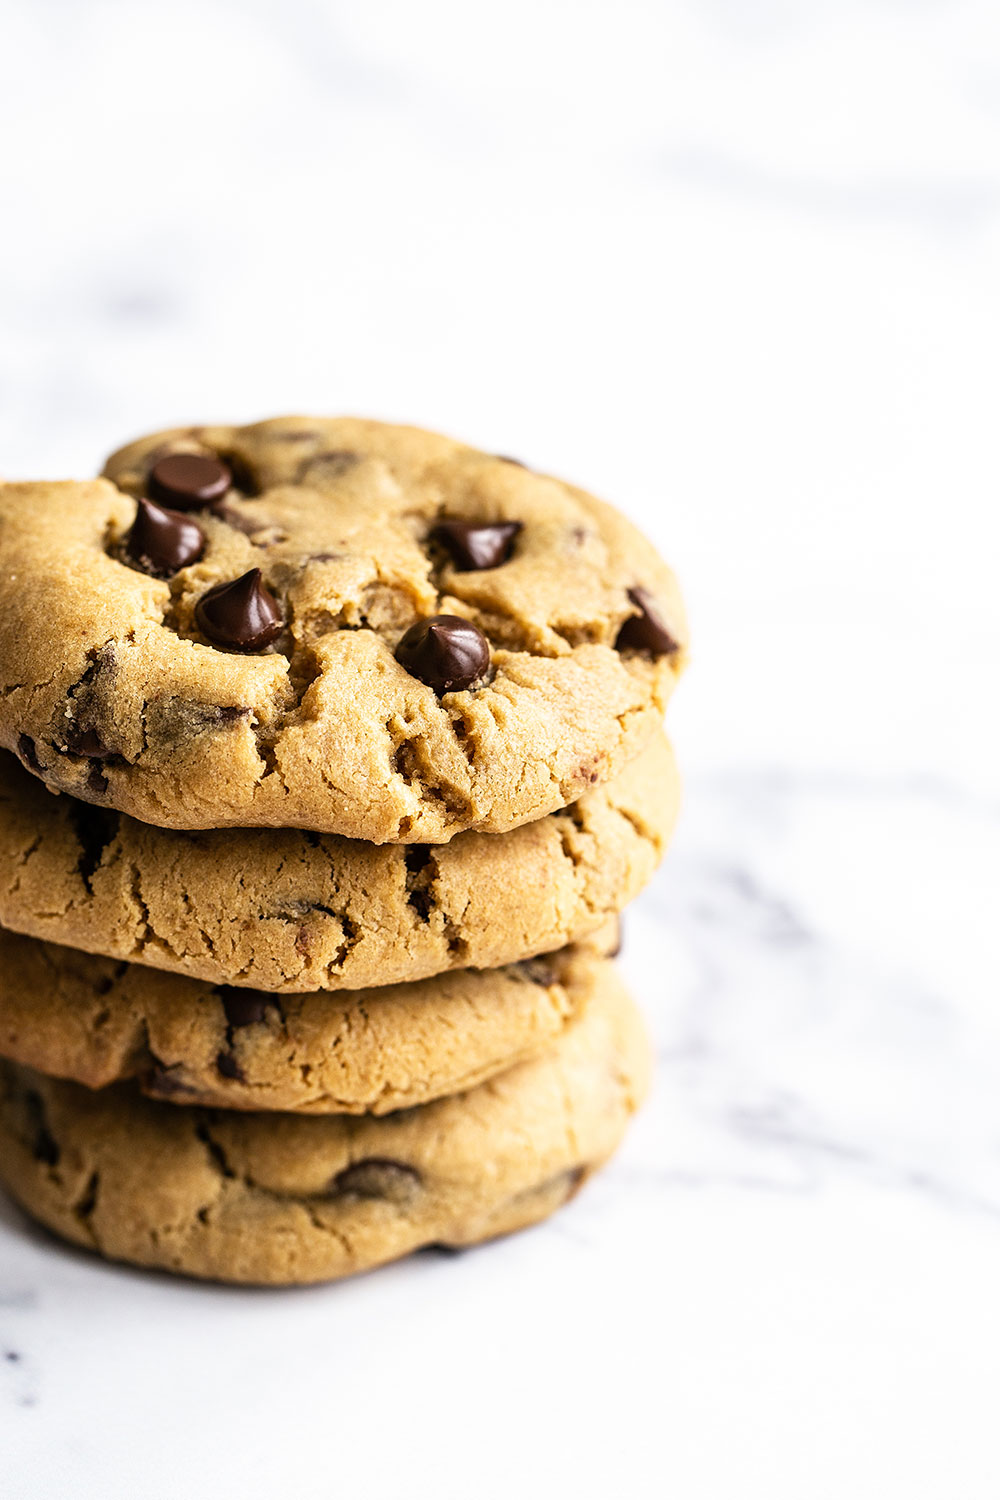 Easy chewy Peanut Butter Chocolate Chip Cookies, stacked several high